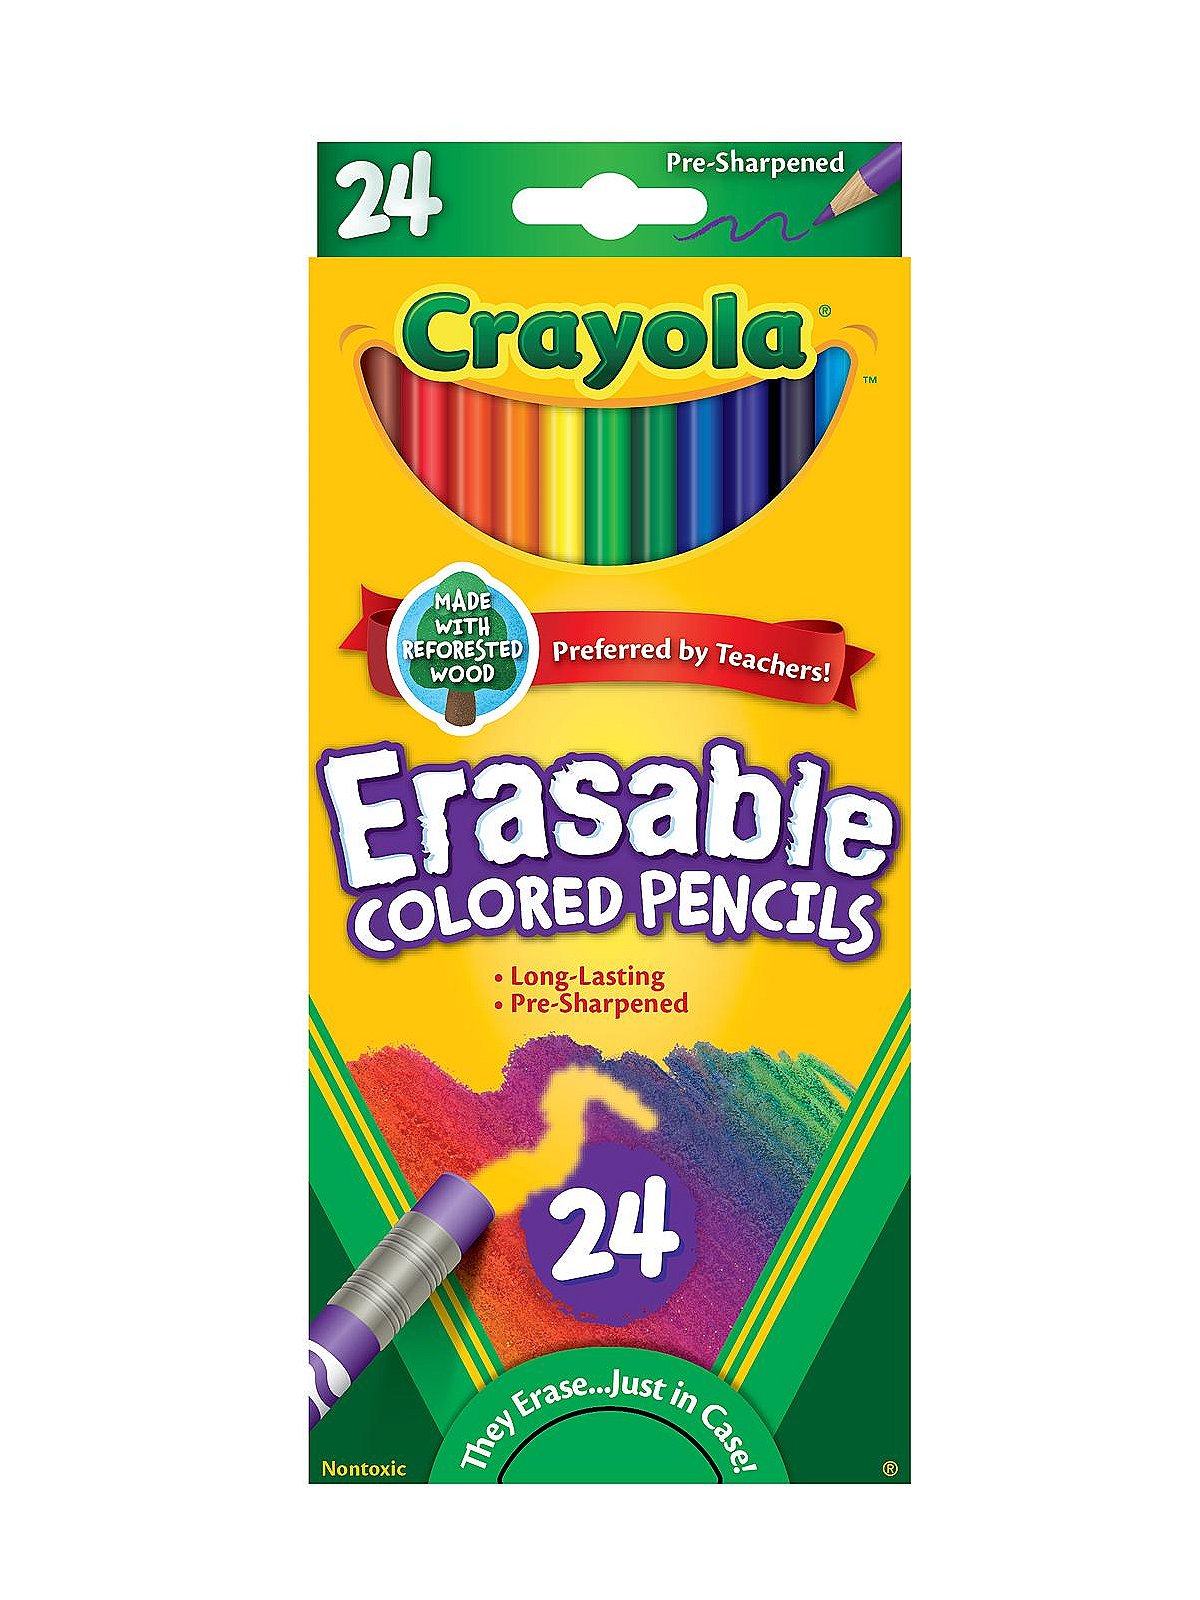 White Crayola Colored Pencils - Set of 5 or 10 with Sharpener